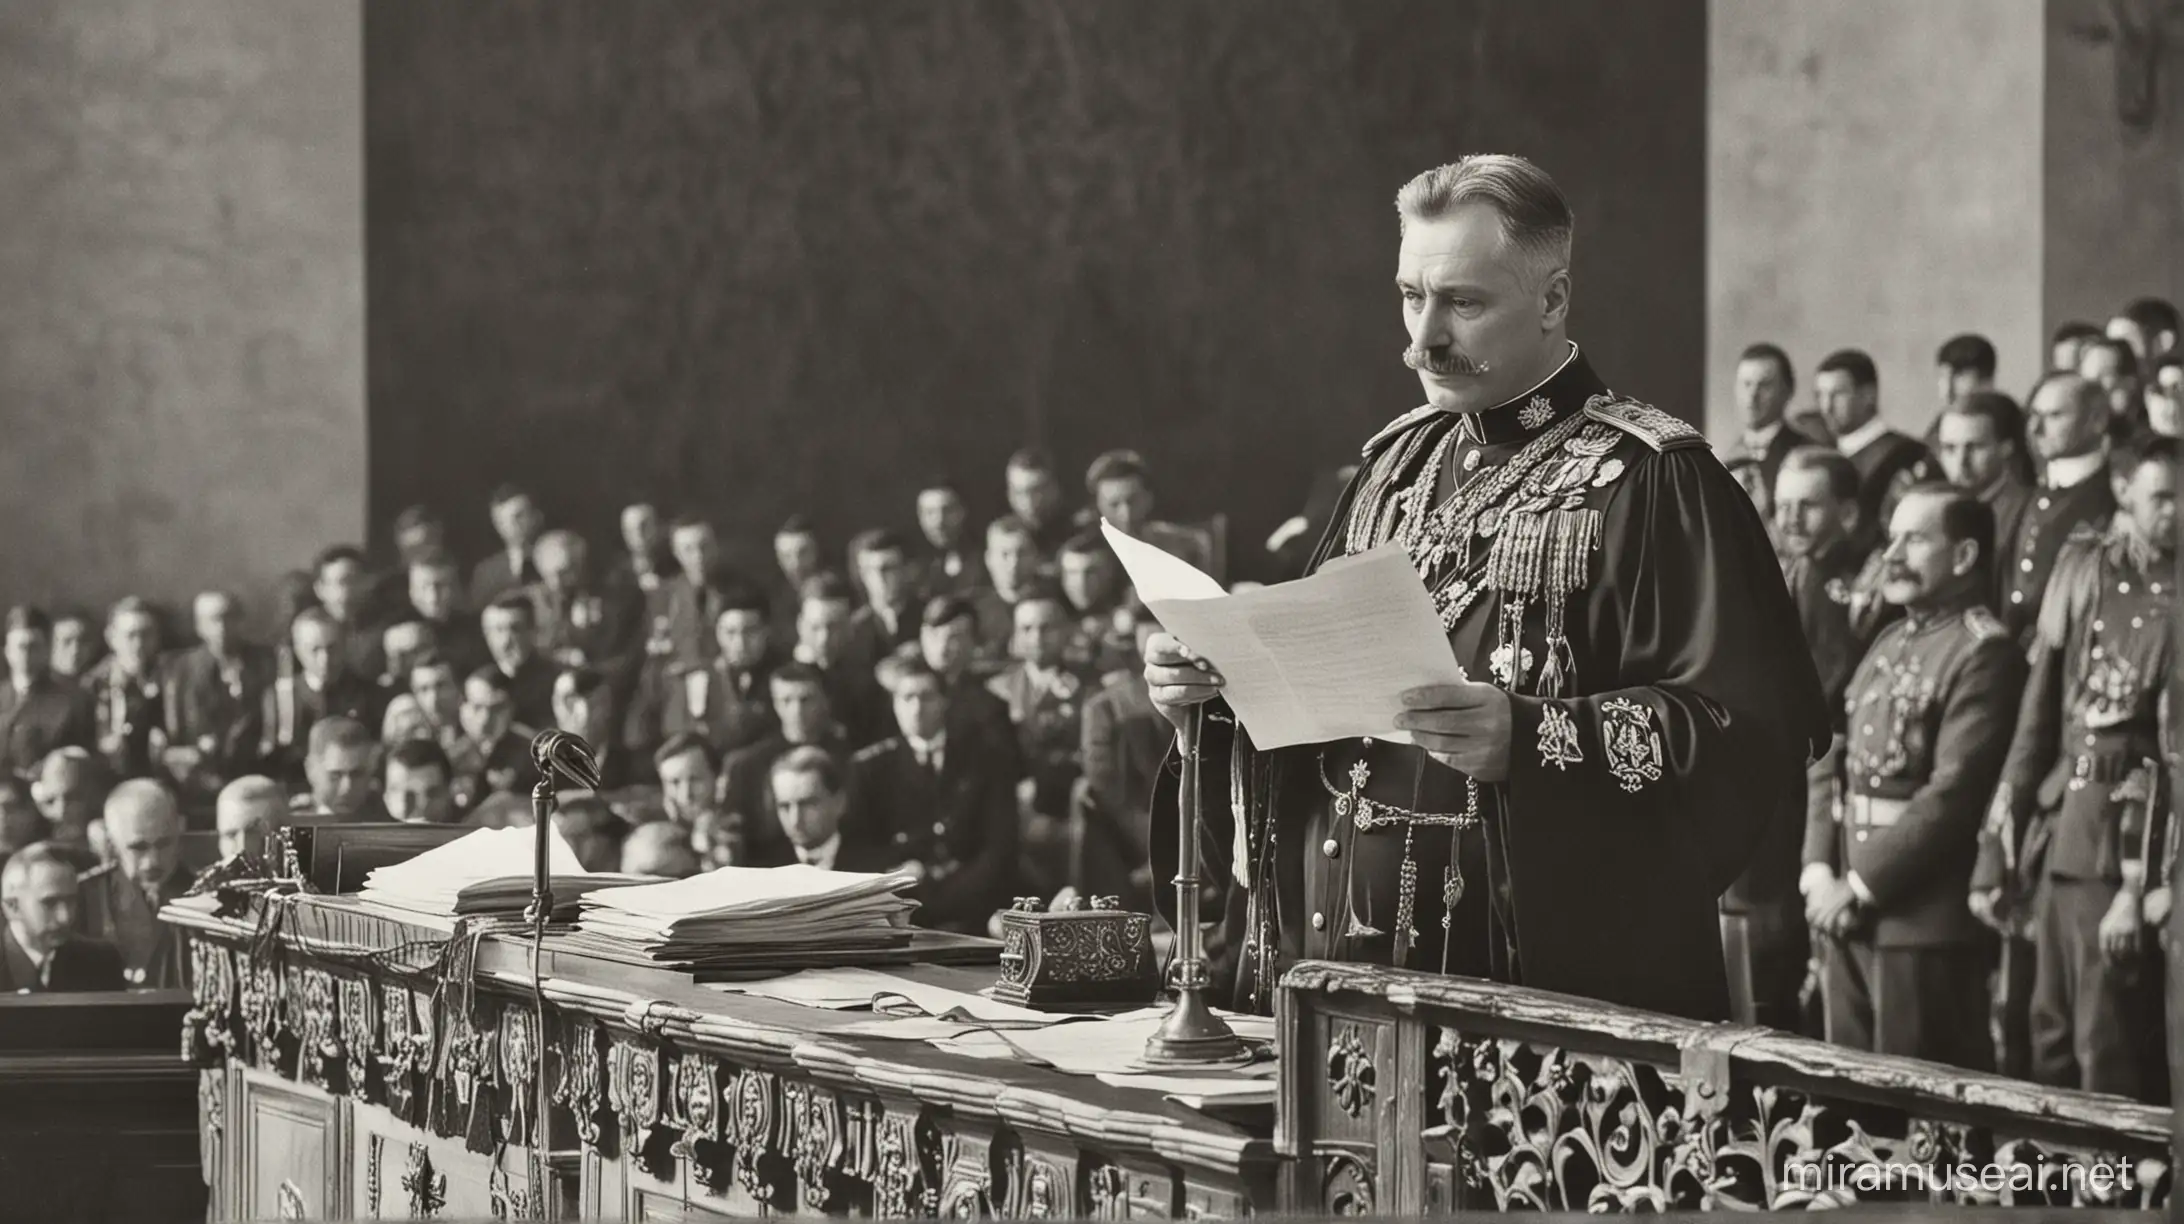 Romanian General Addressing Crowd at 1910 Court Ceremony